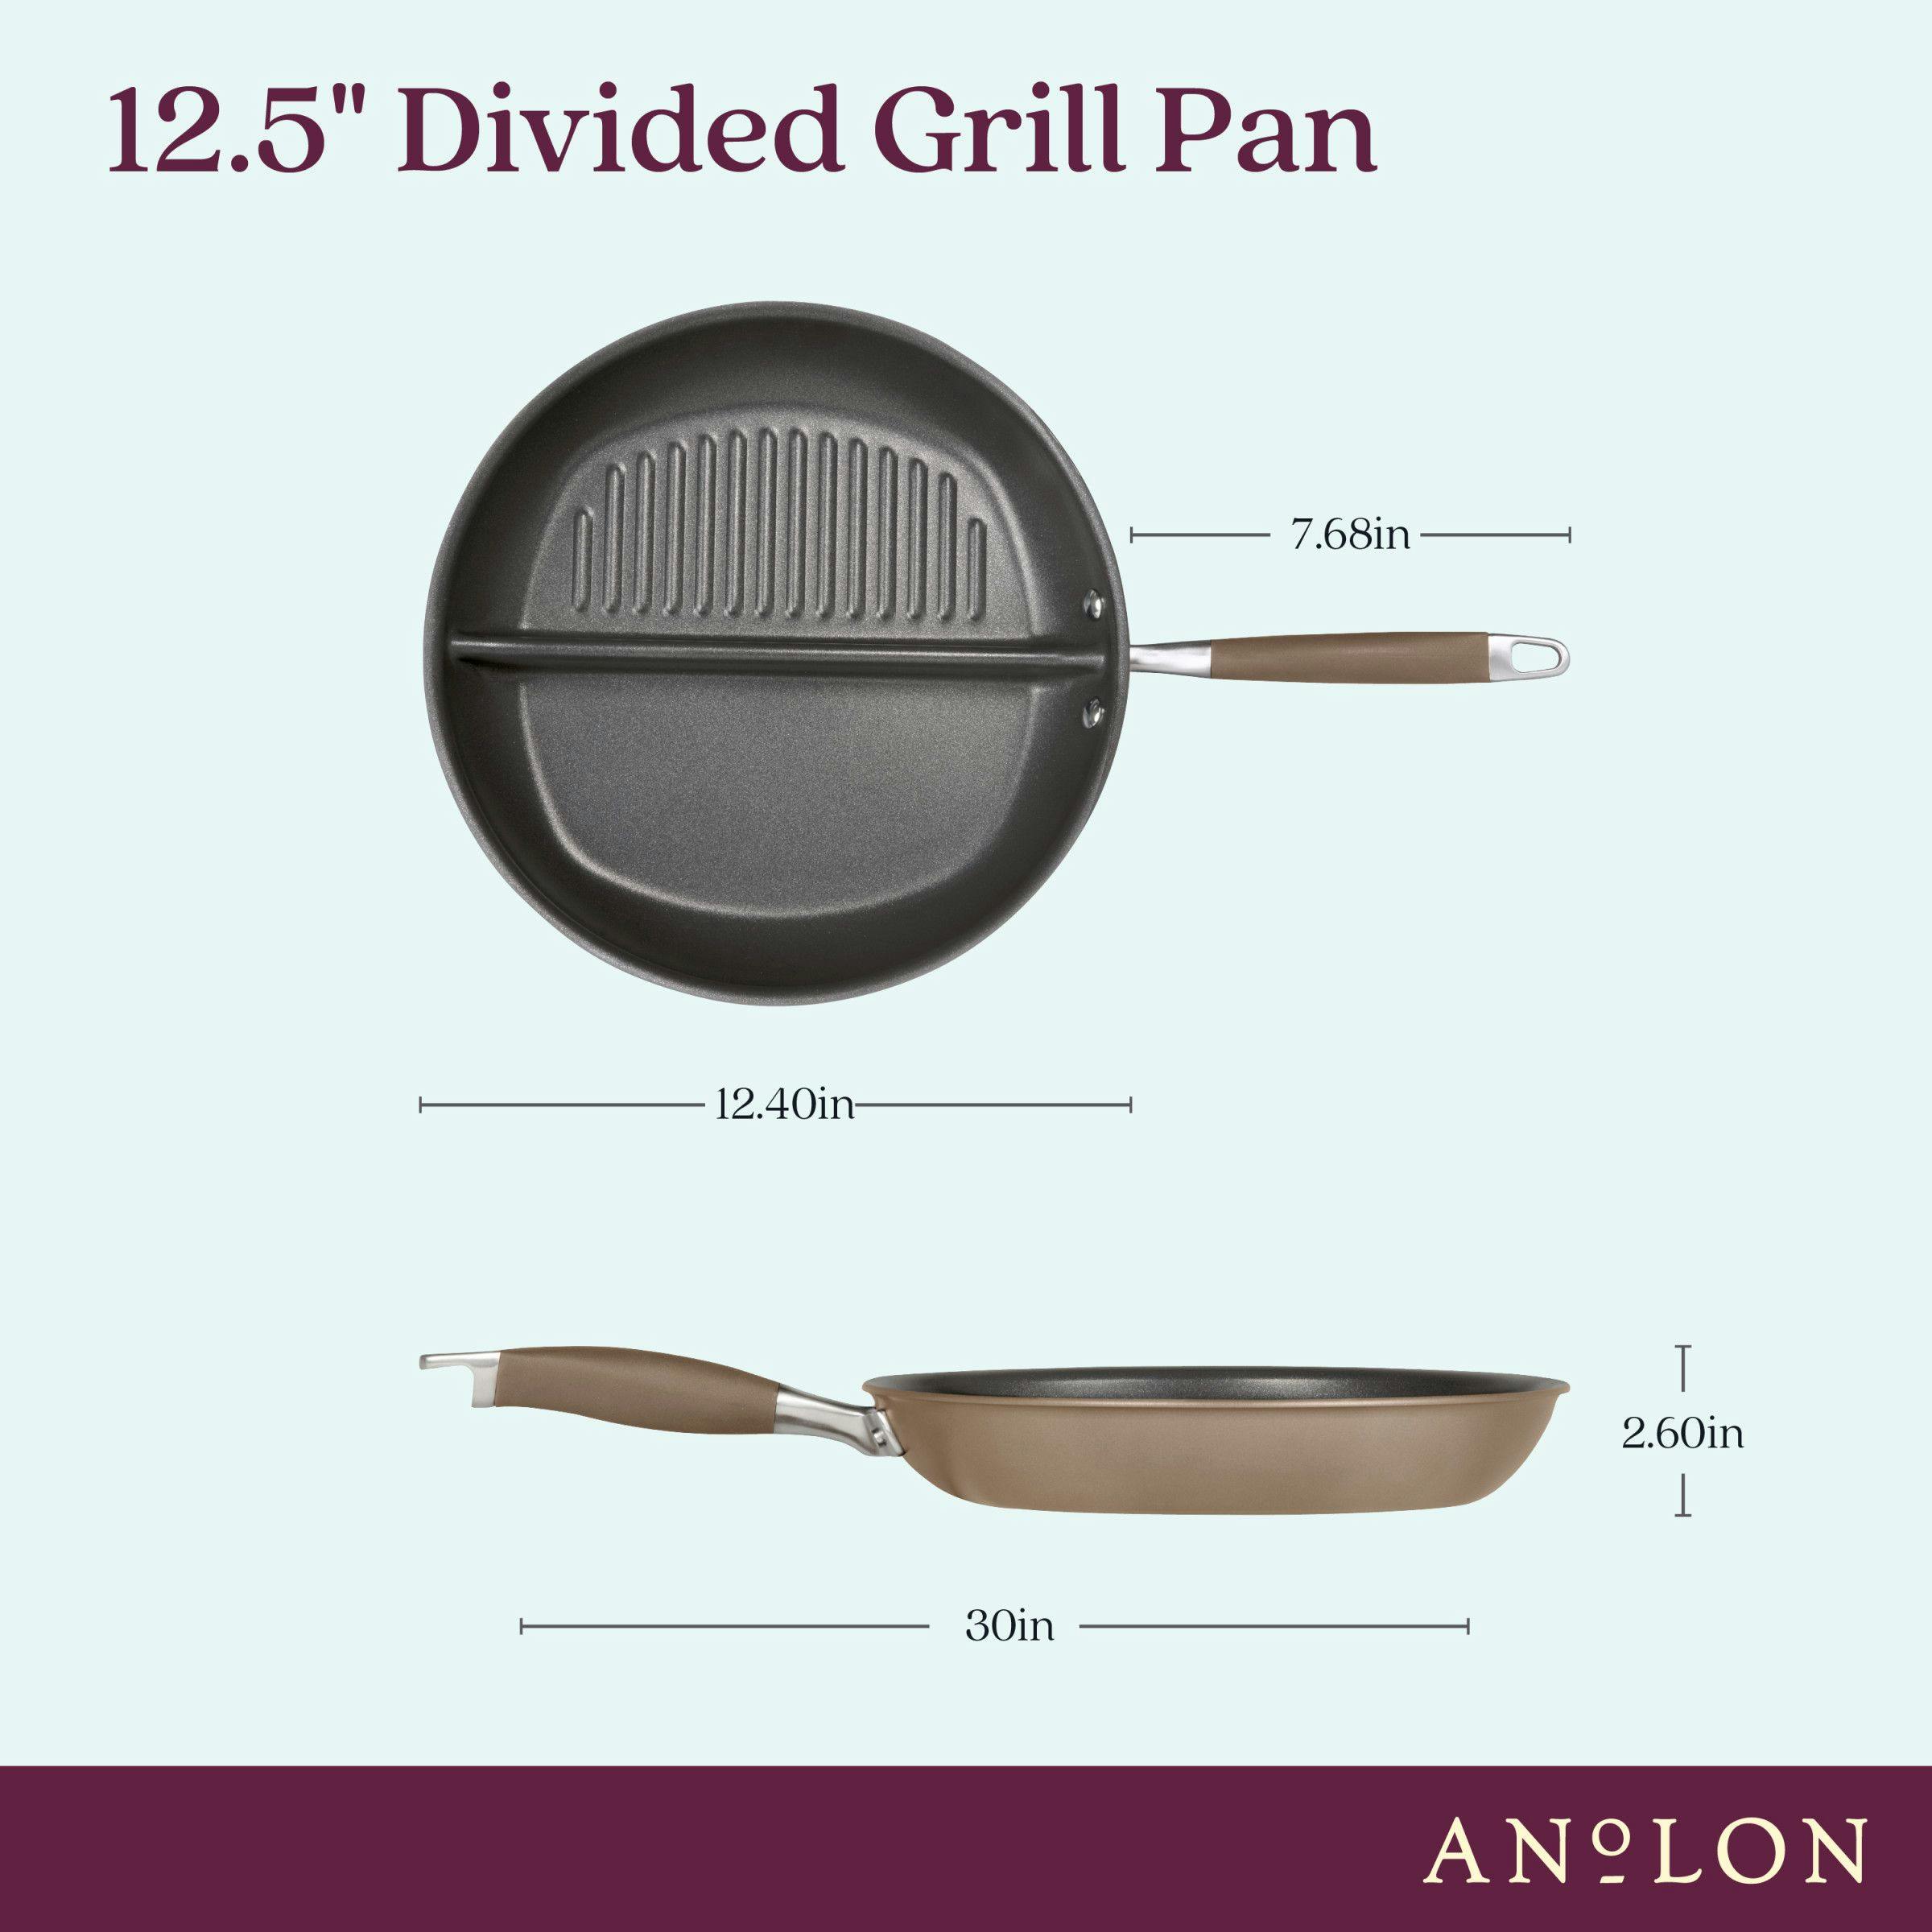 Anolon Advanced Home Hard-Anodized Nonstick Divided Grill and Griddle Pan, 12.5-Inch